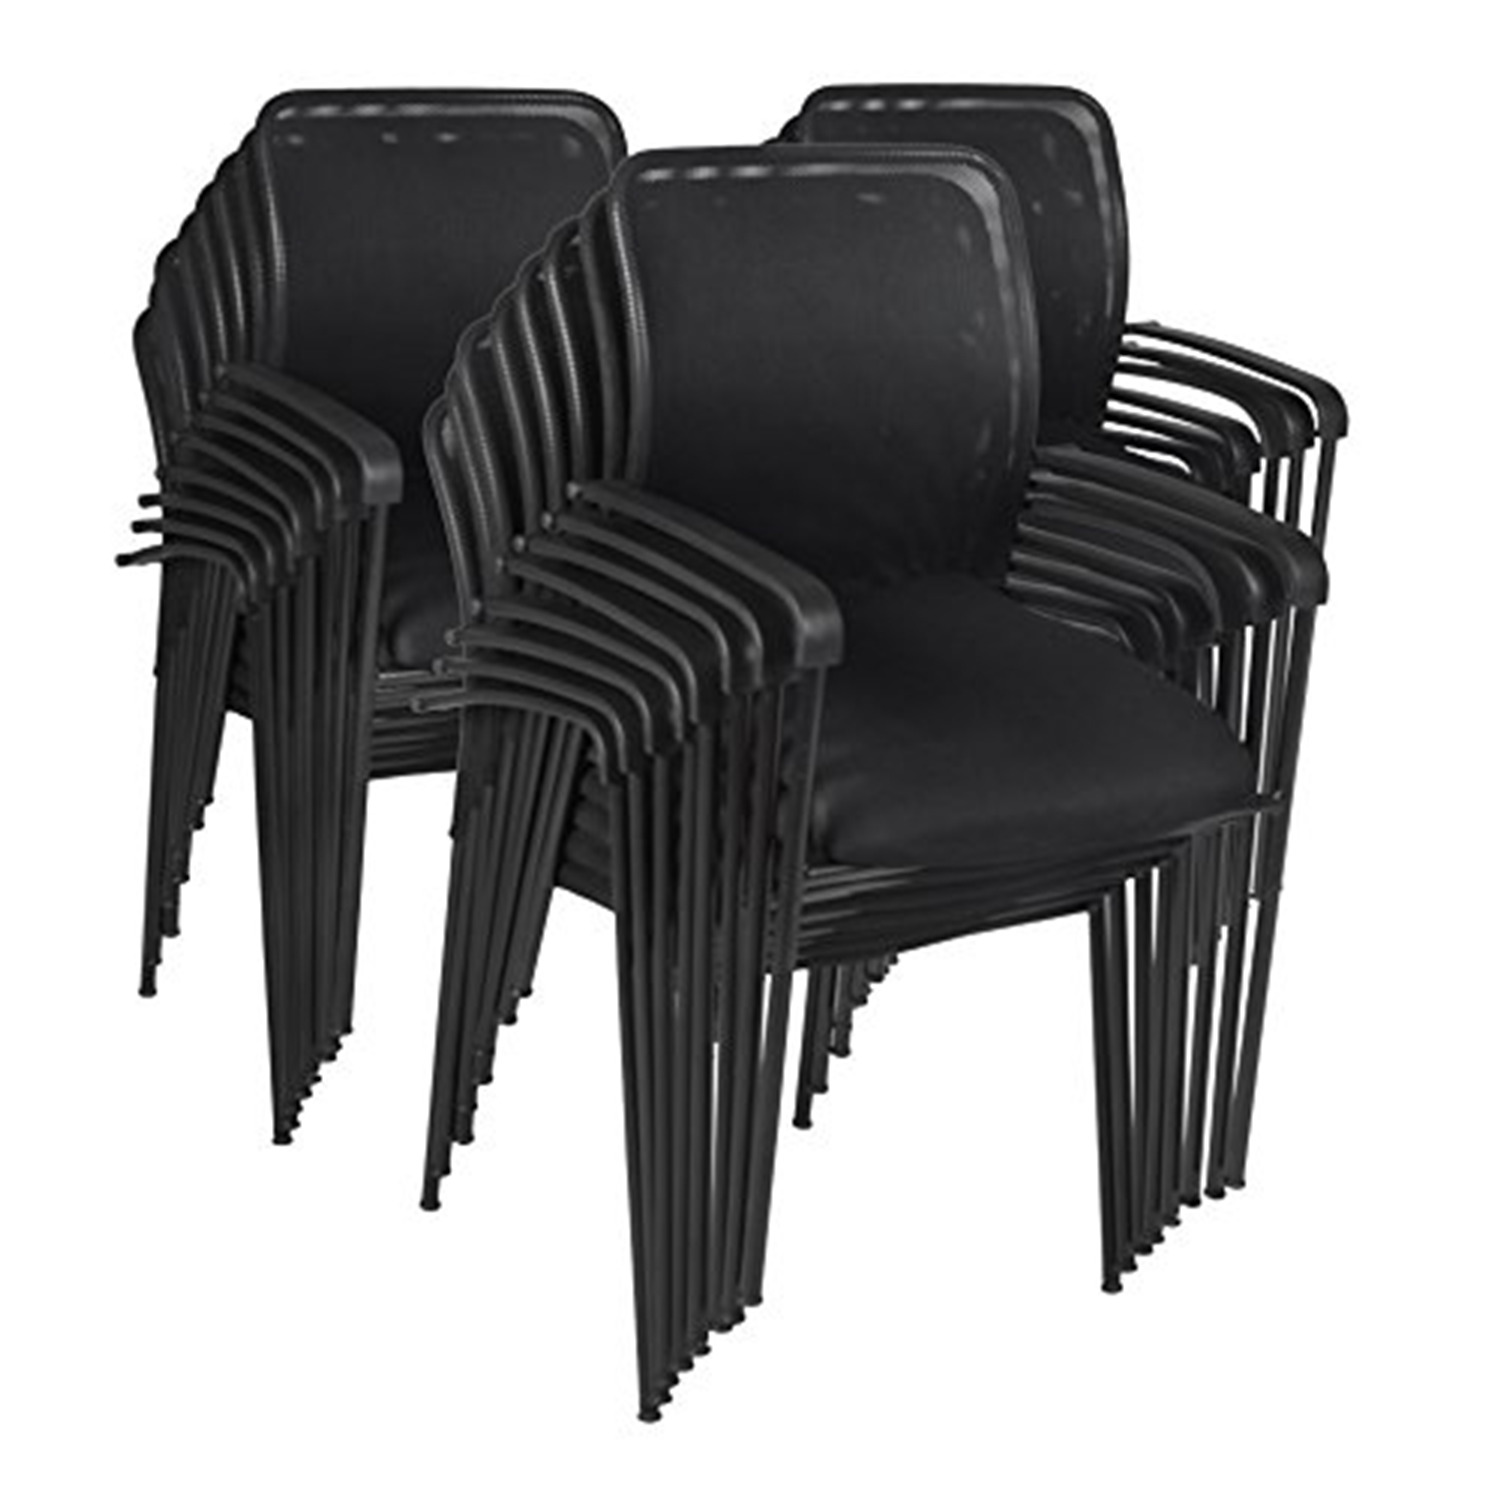 Mario Stack Chair (24 pack)- Black - image 1 of 4